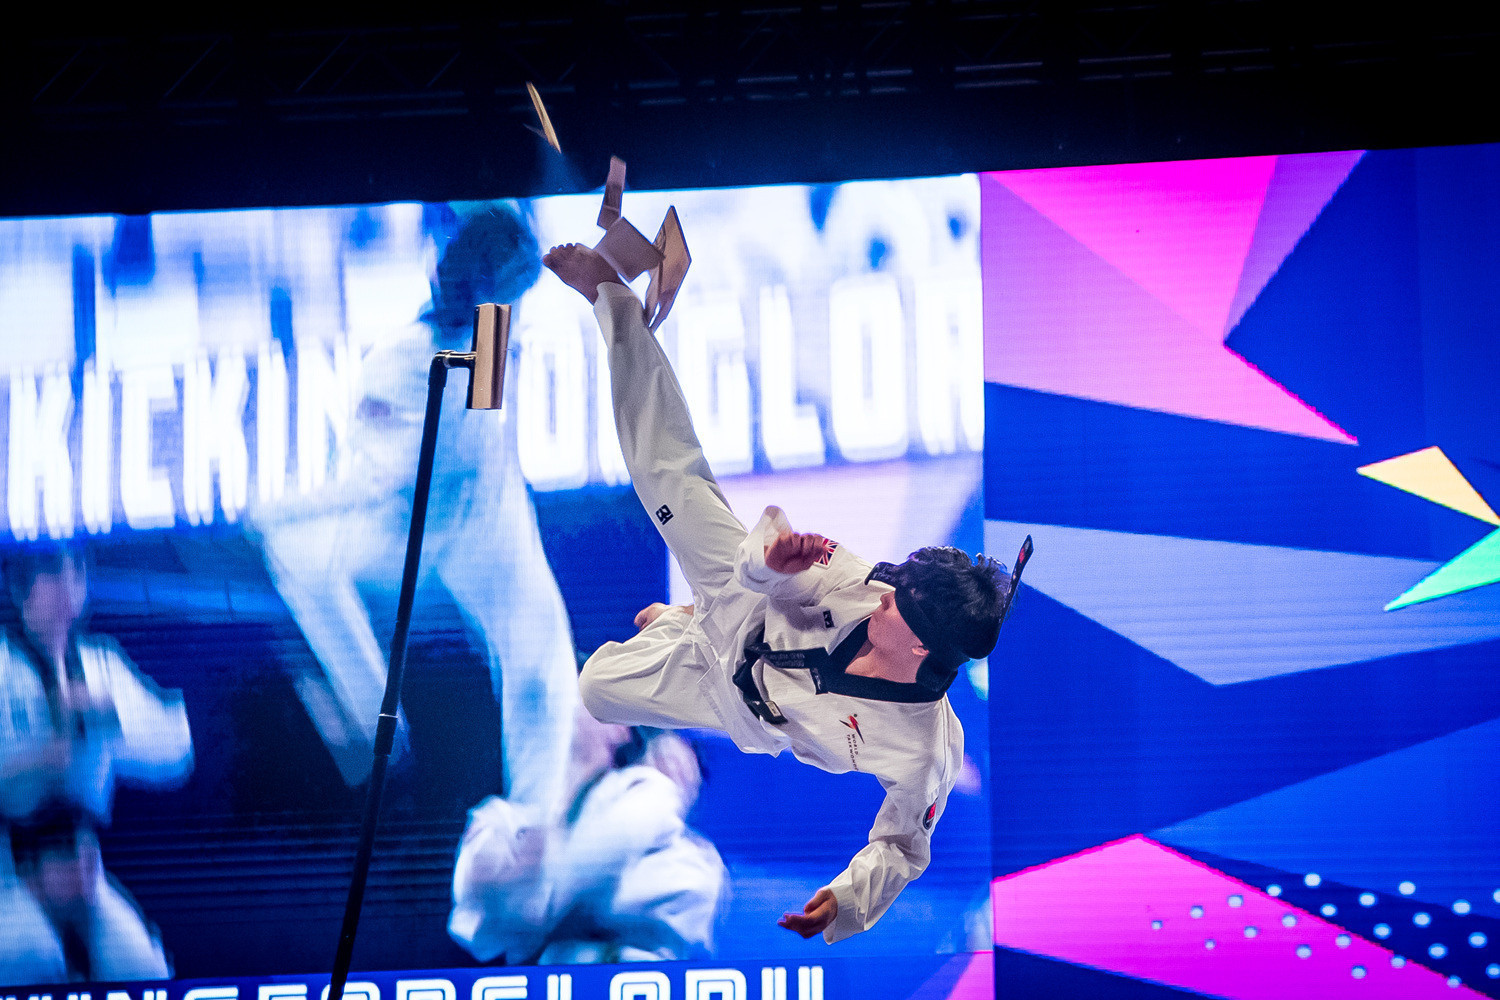 The World Taekwondo demonstration team will perform in India for the first time ©World Taekwondo